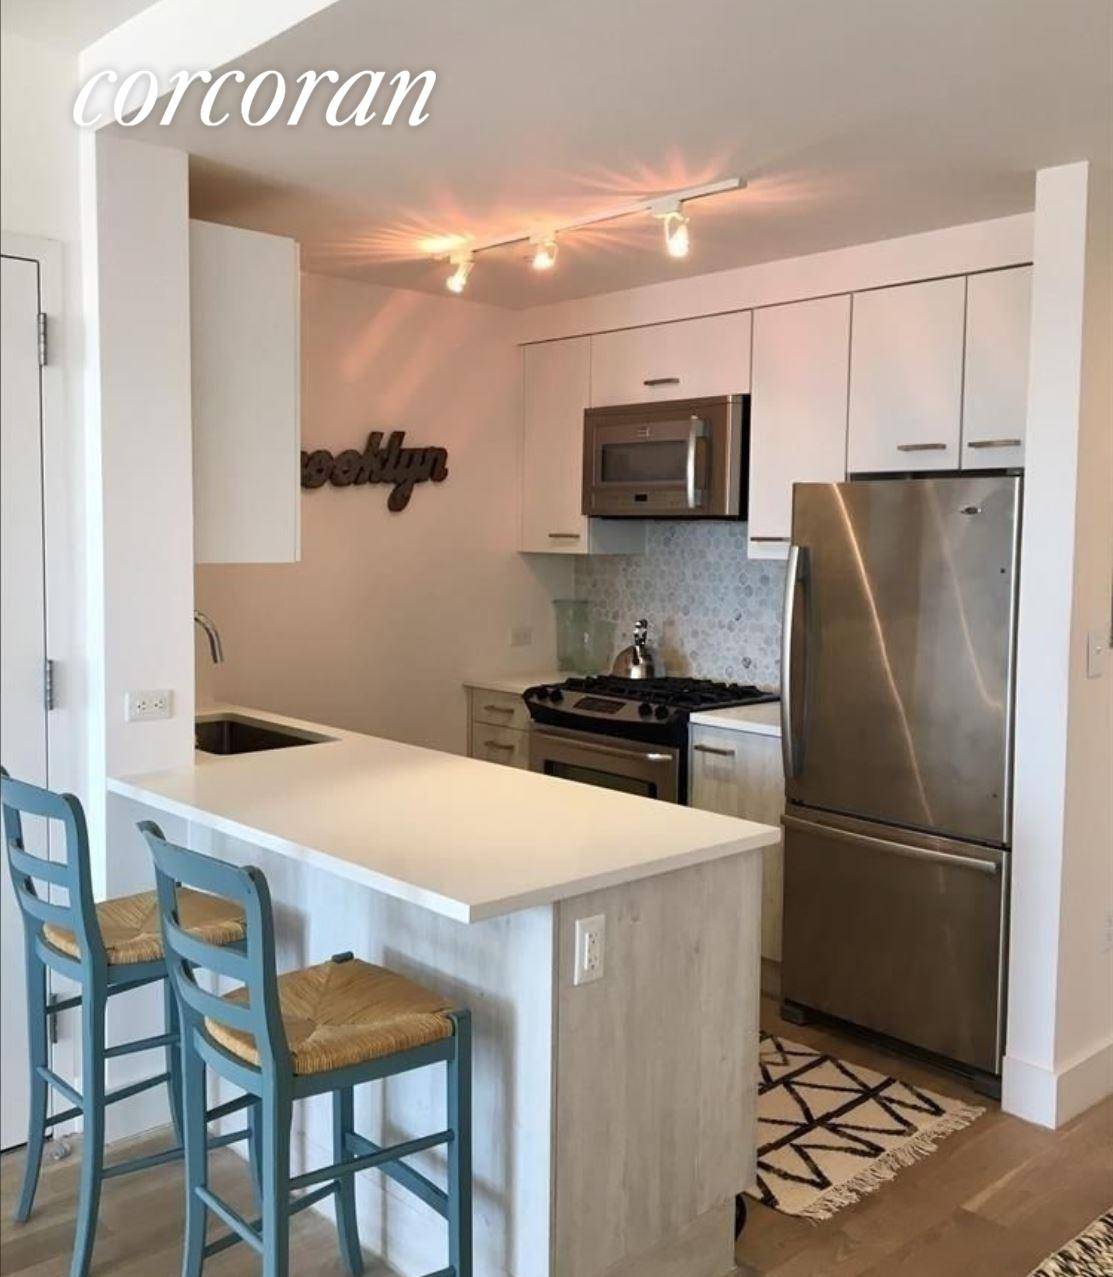 Spacious One Bedroom Home Available at 267 Pacific Street This gracious layout featuring wide plank solid white oak floors, stainless steel appliances with paneled dishwasher, custom German kitchen cabinets with ...